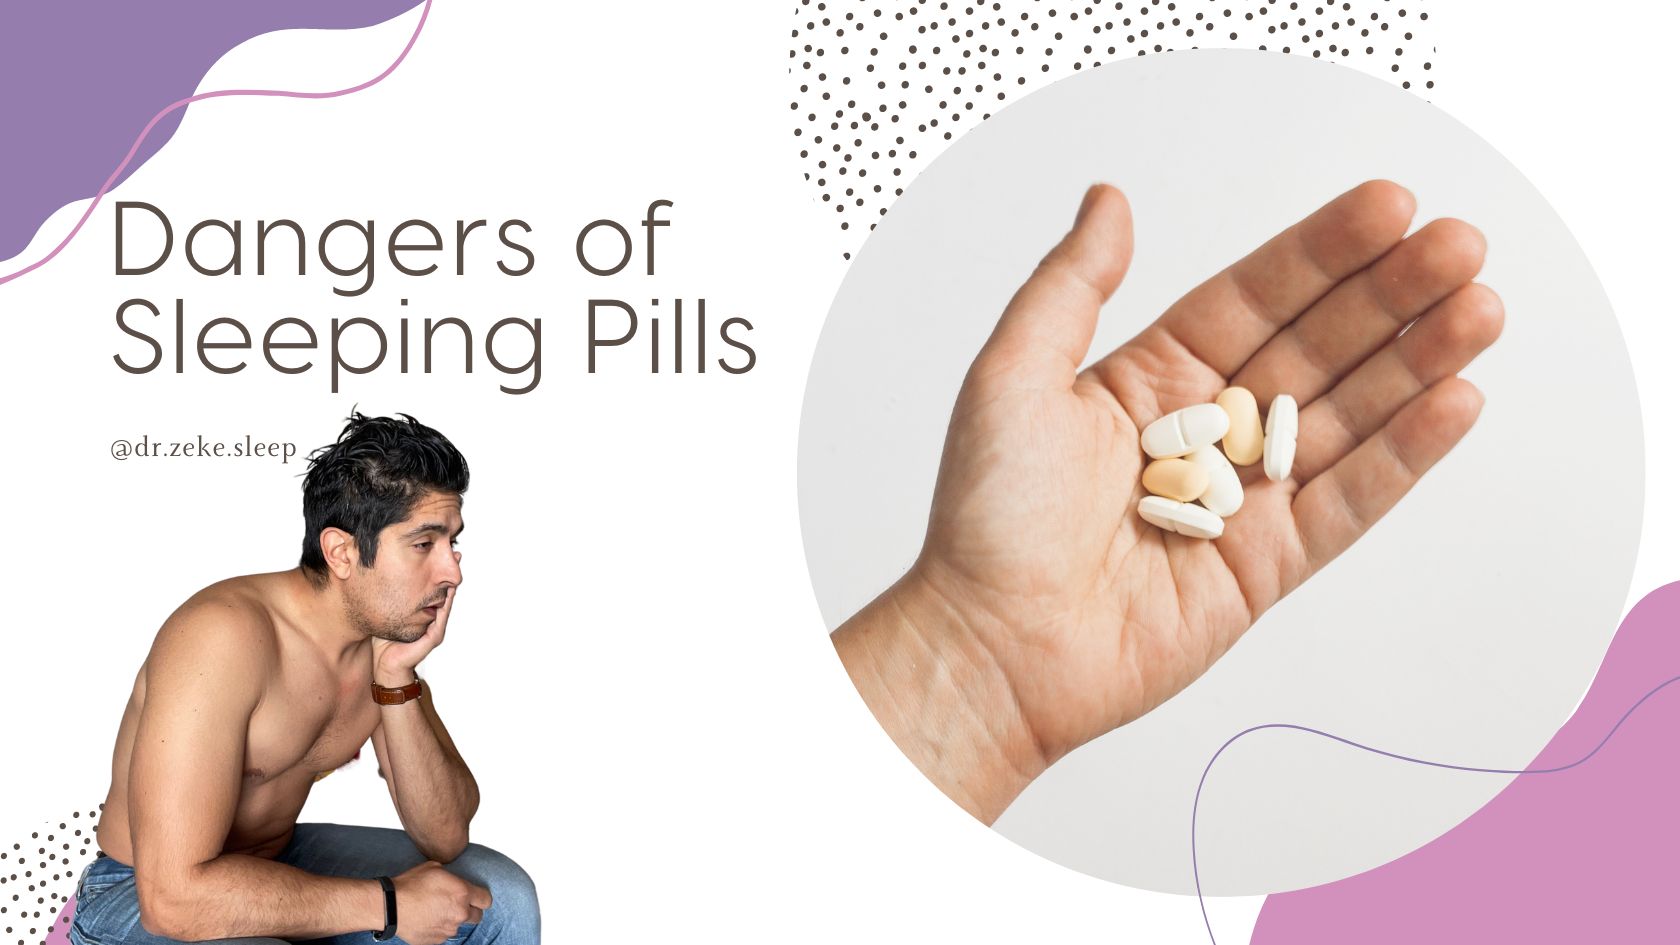 which sleeping pill is dangerous?